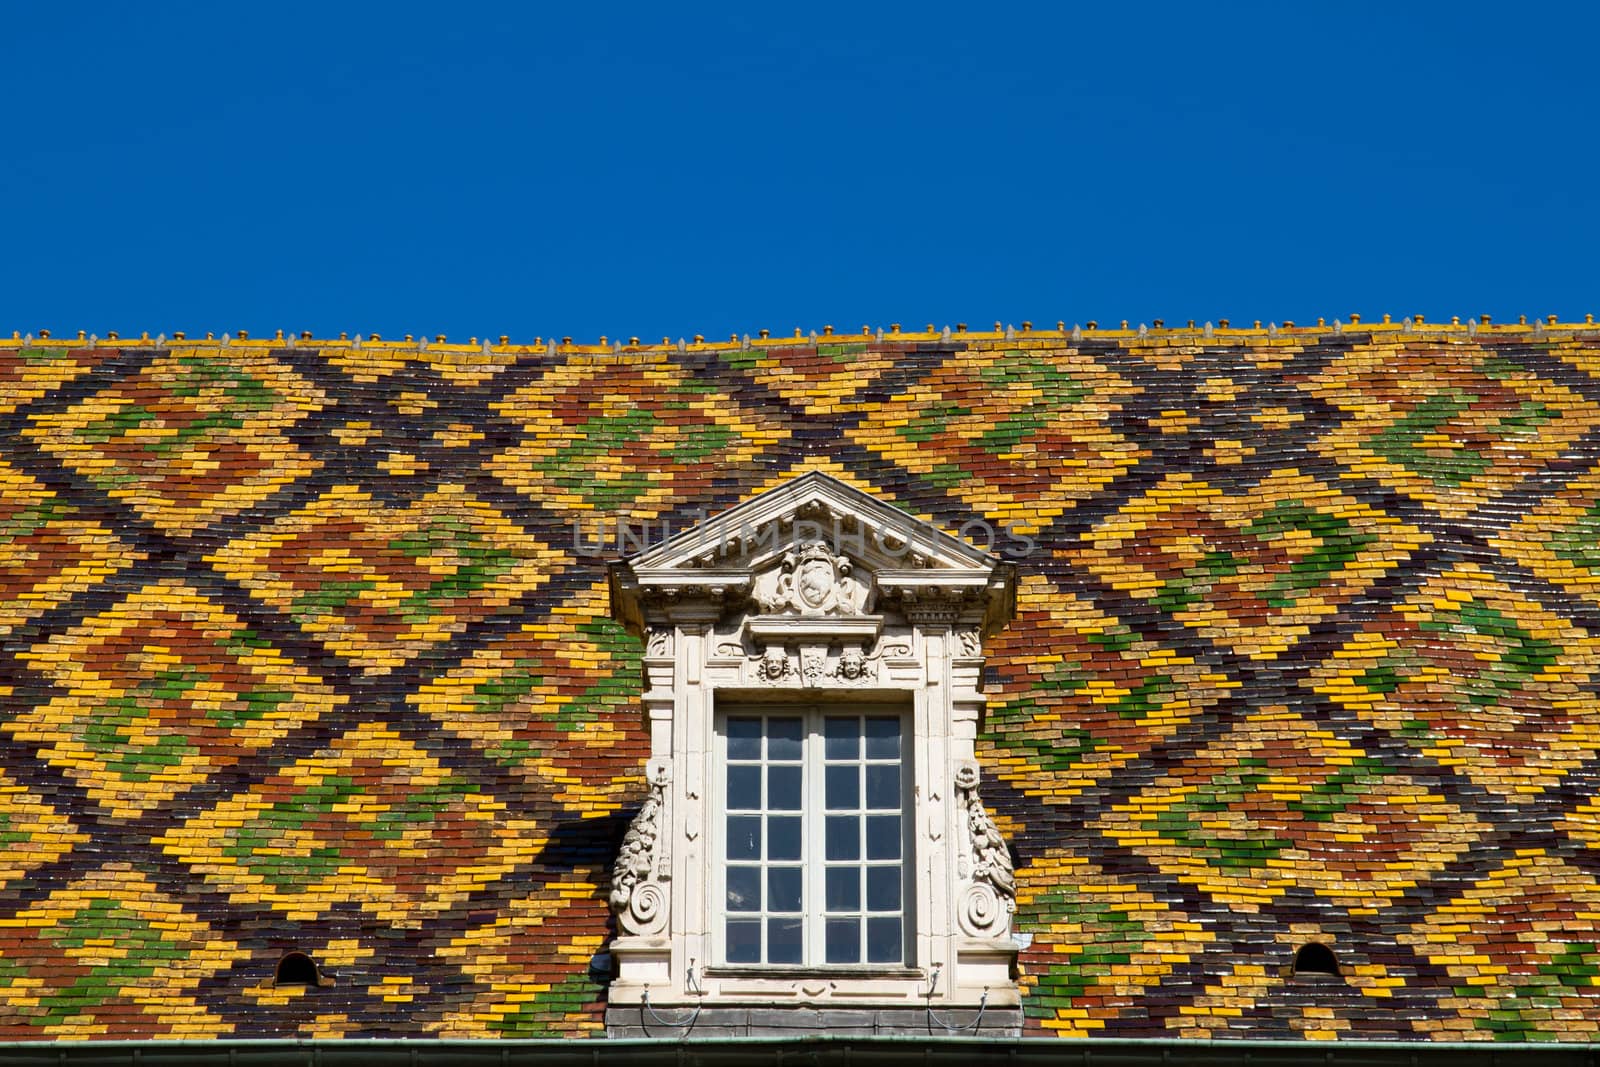 A Colored roof tile against blue sky